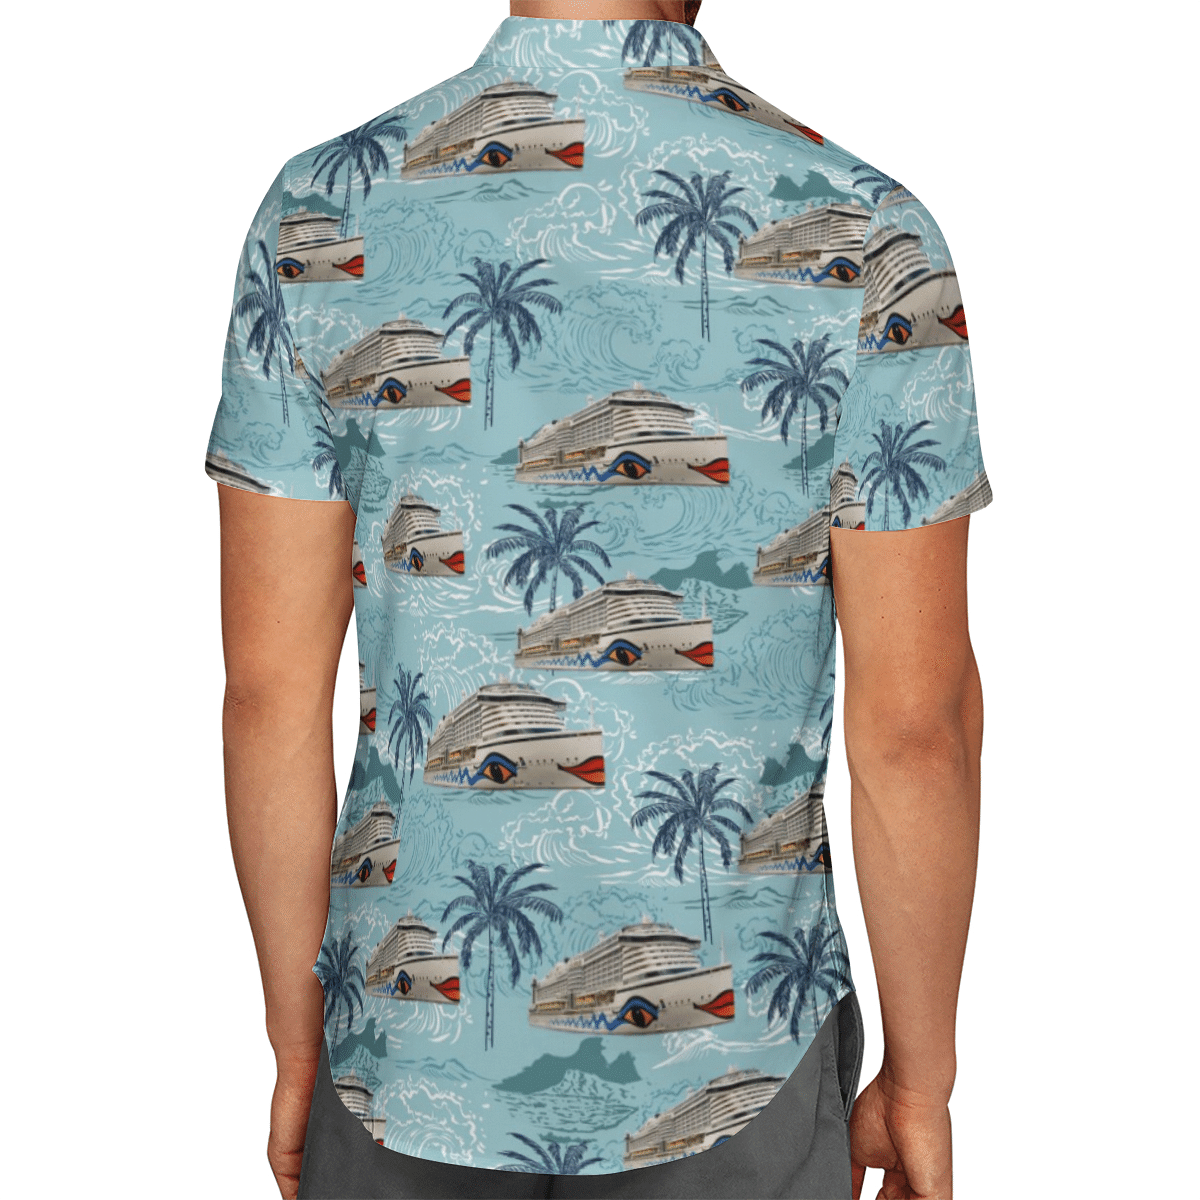 Going to the beach with a quality shirt 119